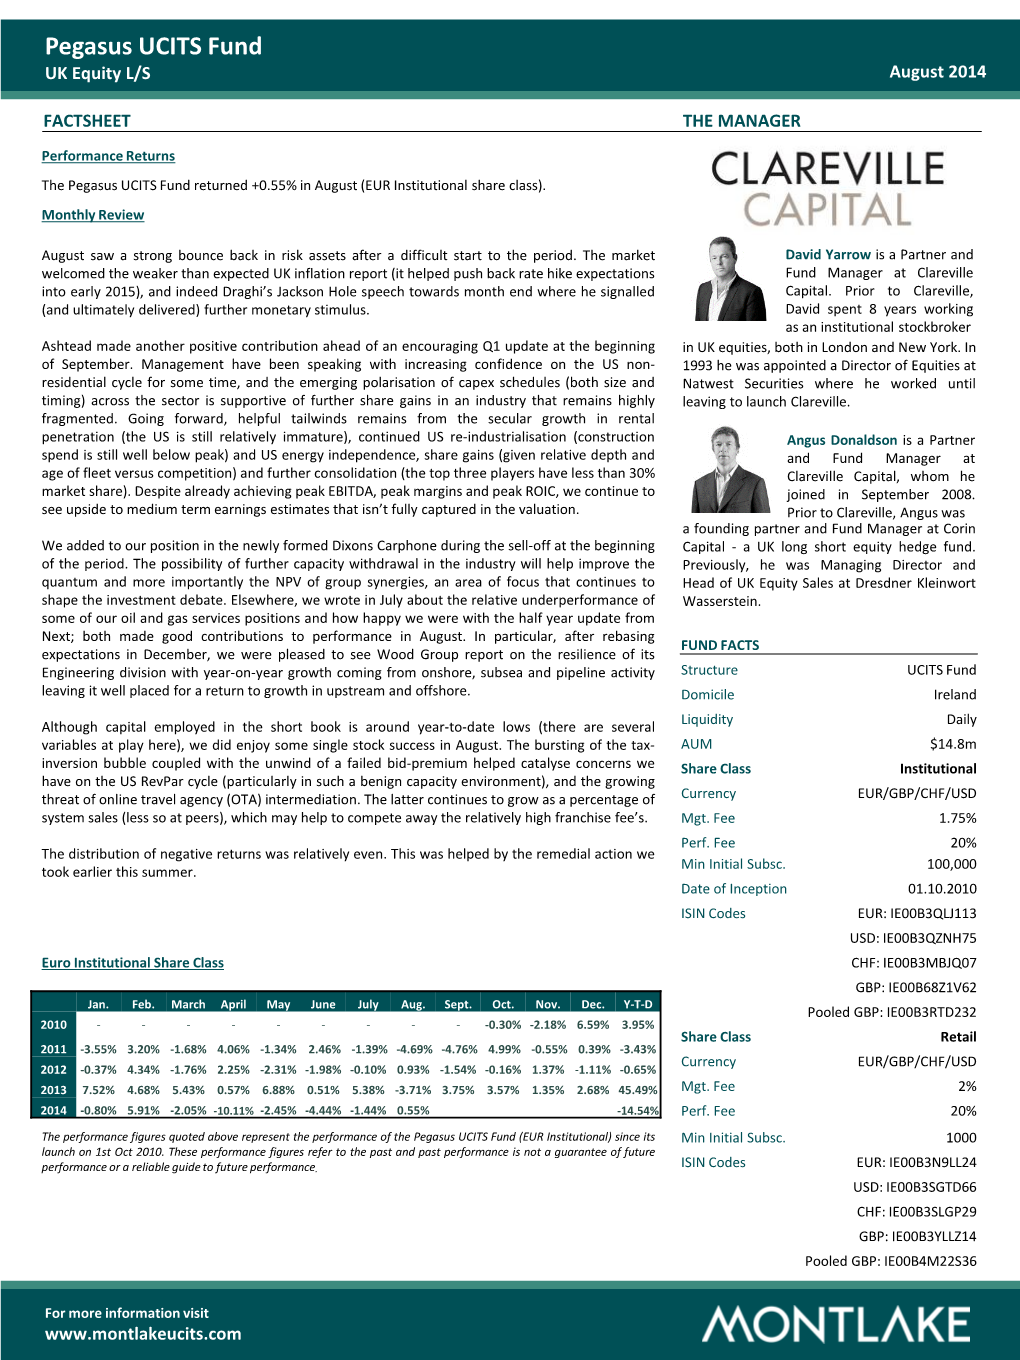 Pegasus UCITS Fund UK Equity L/S August 2014